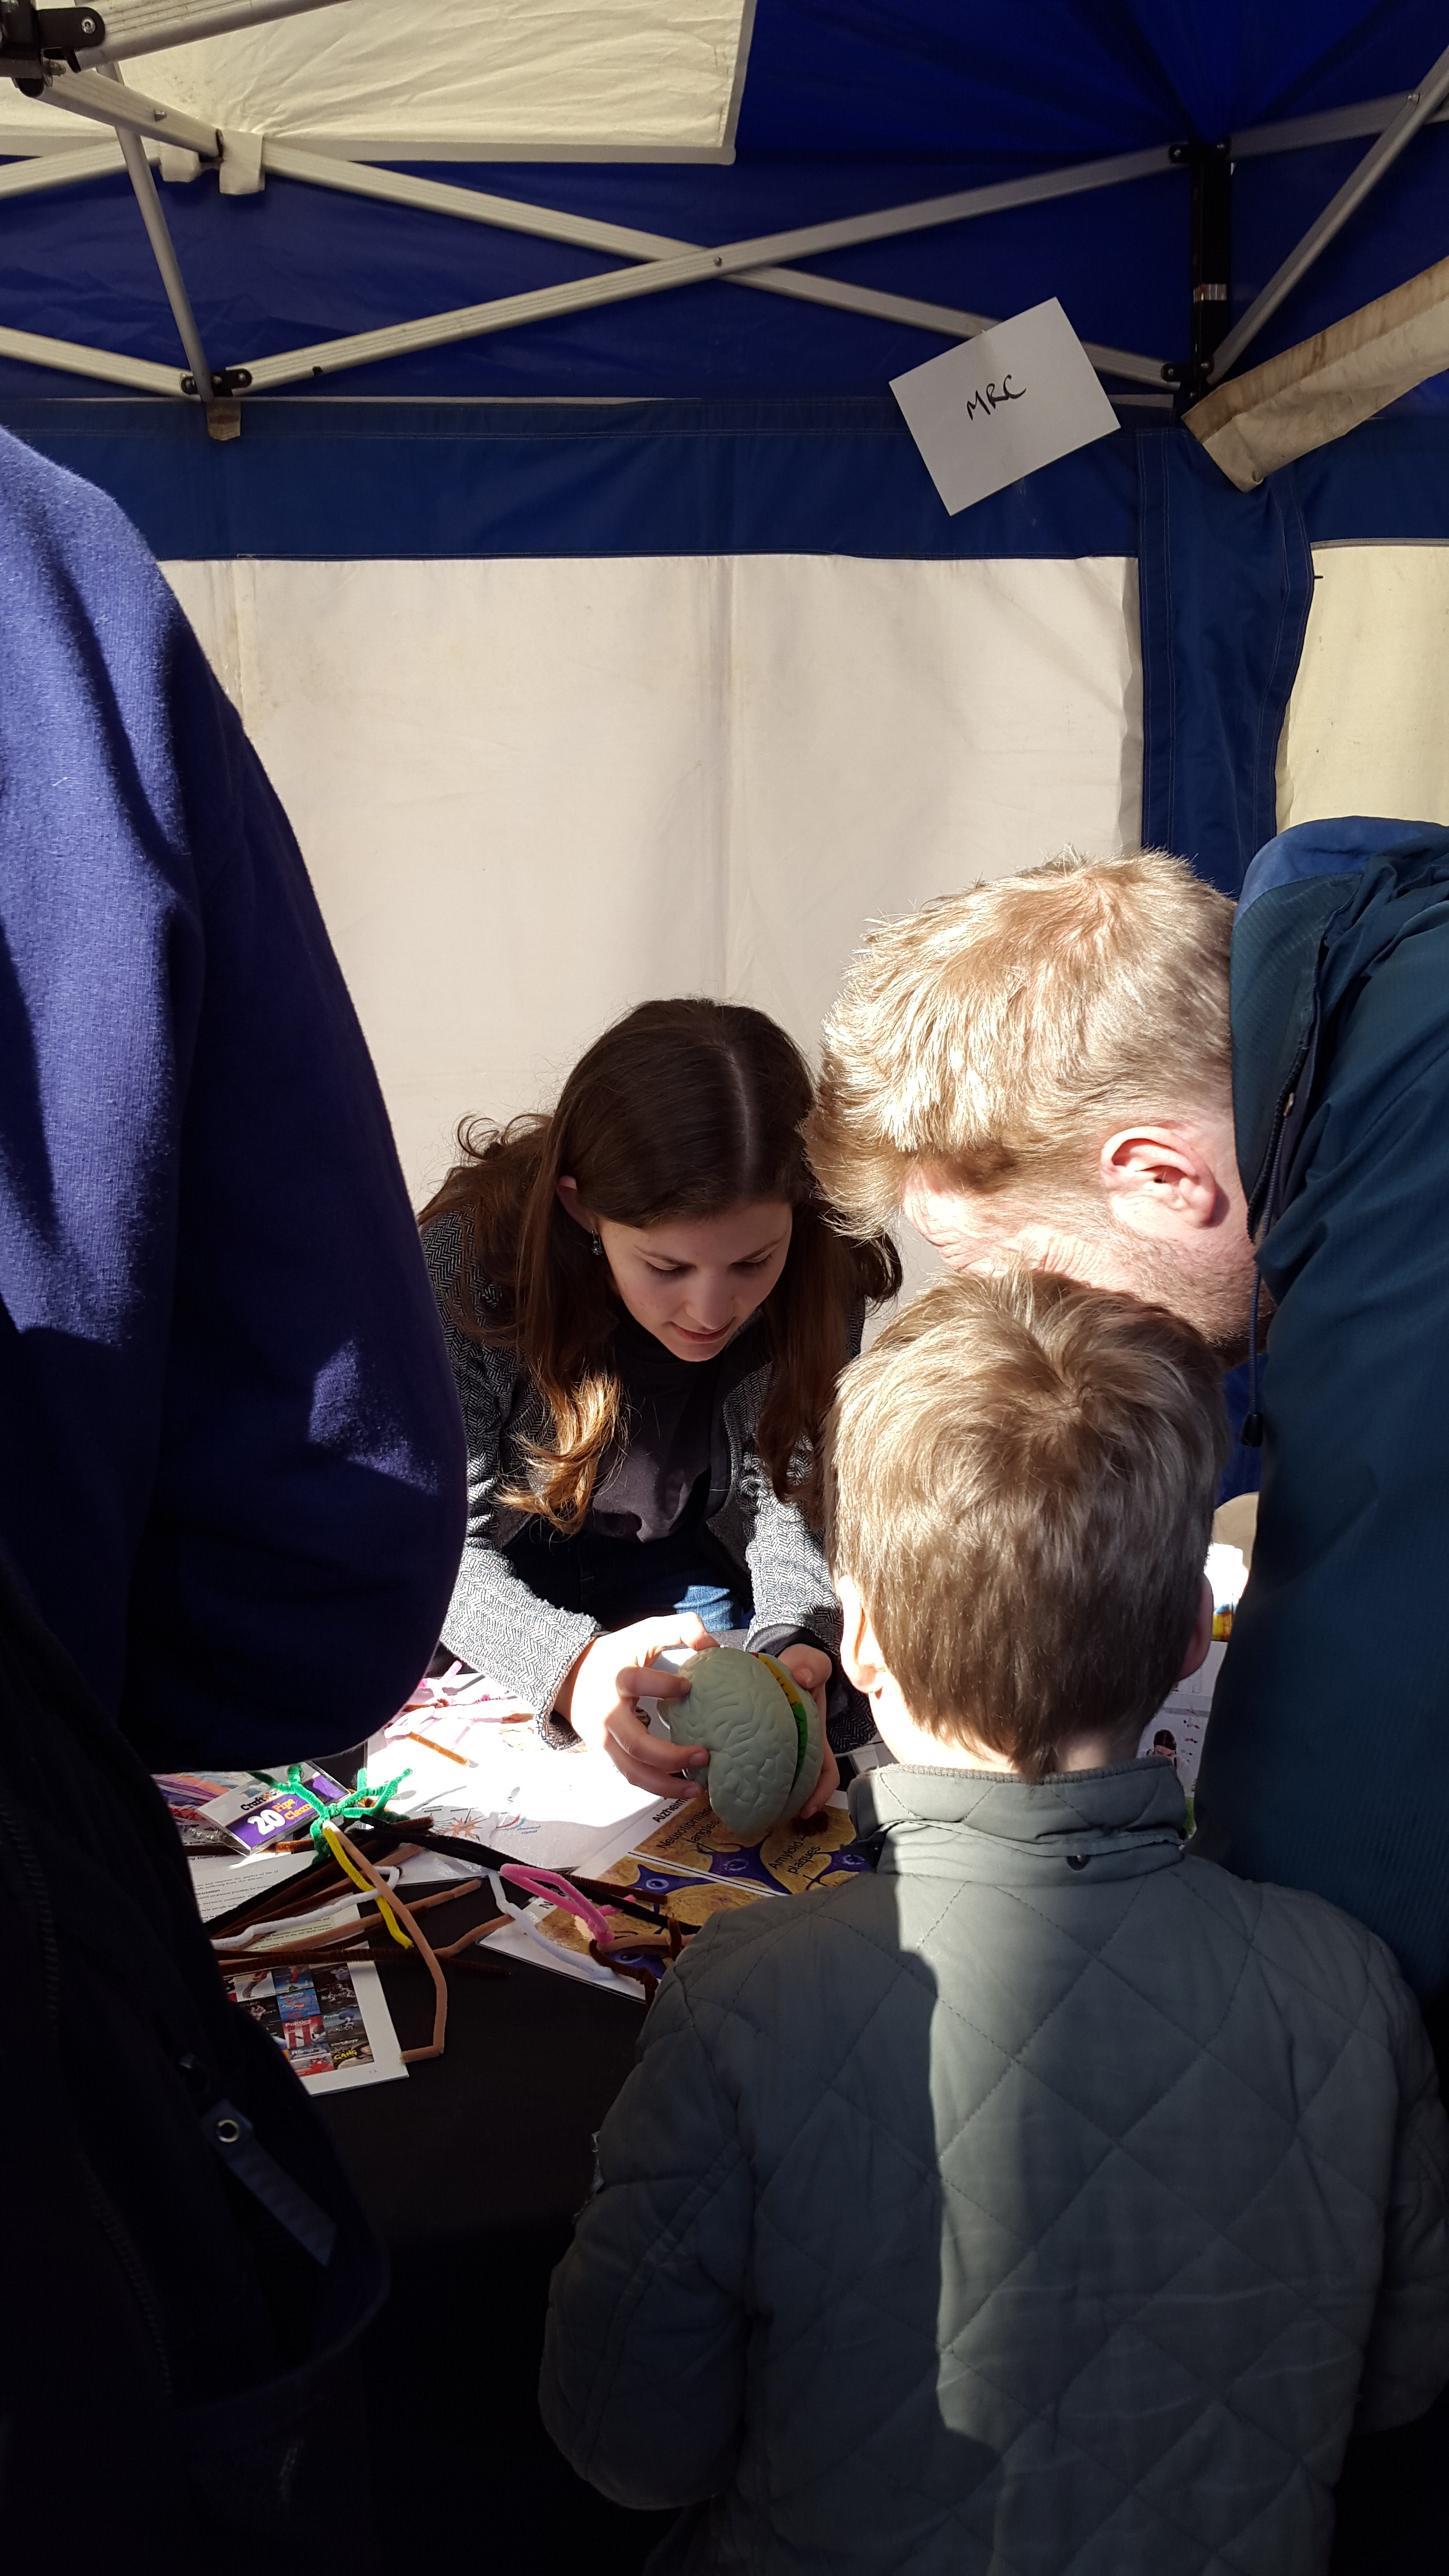 Unit members engage at the Oxfordshire Science Festival 2015